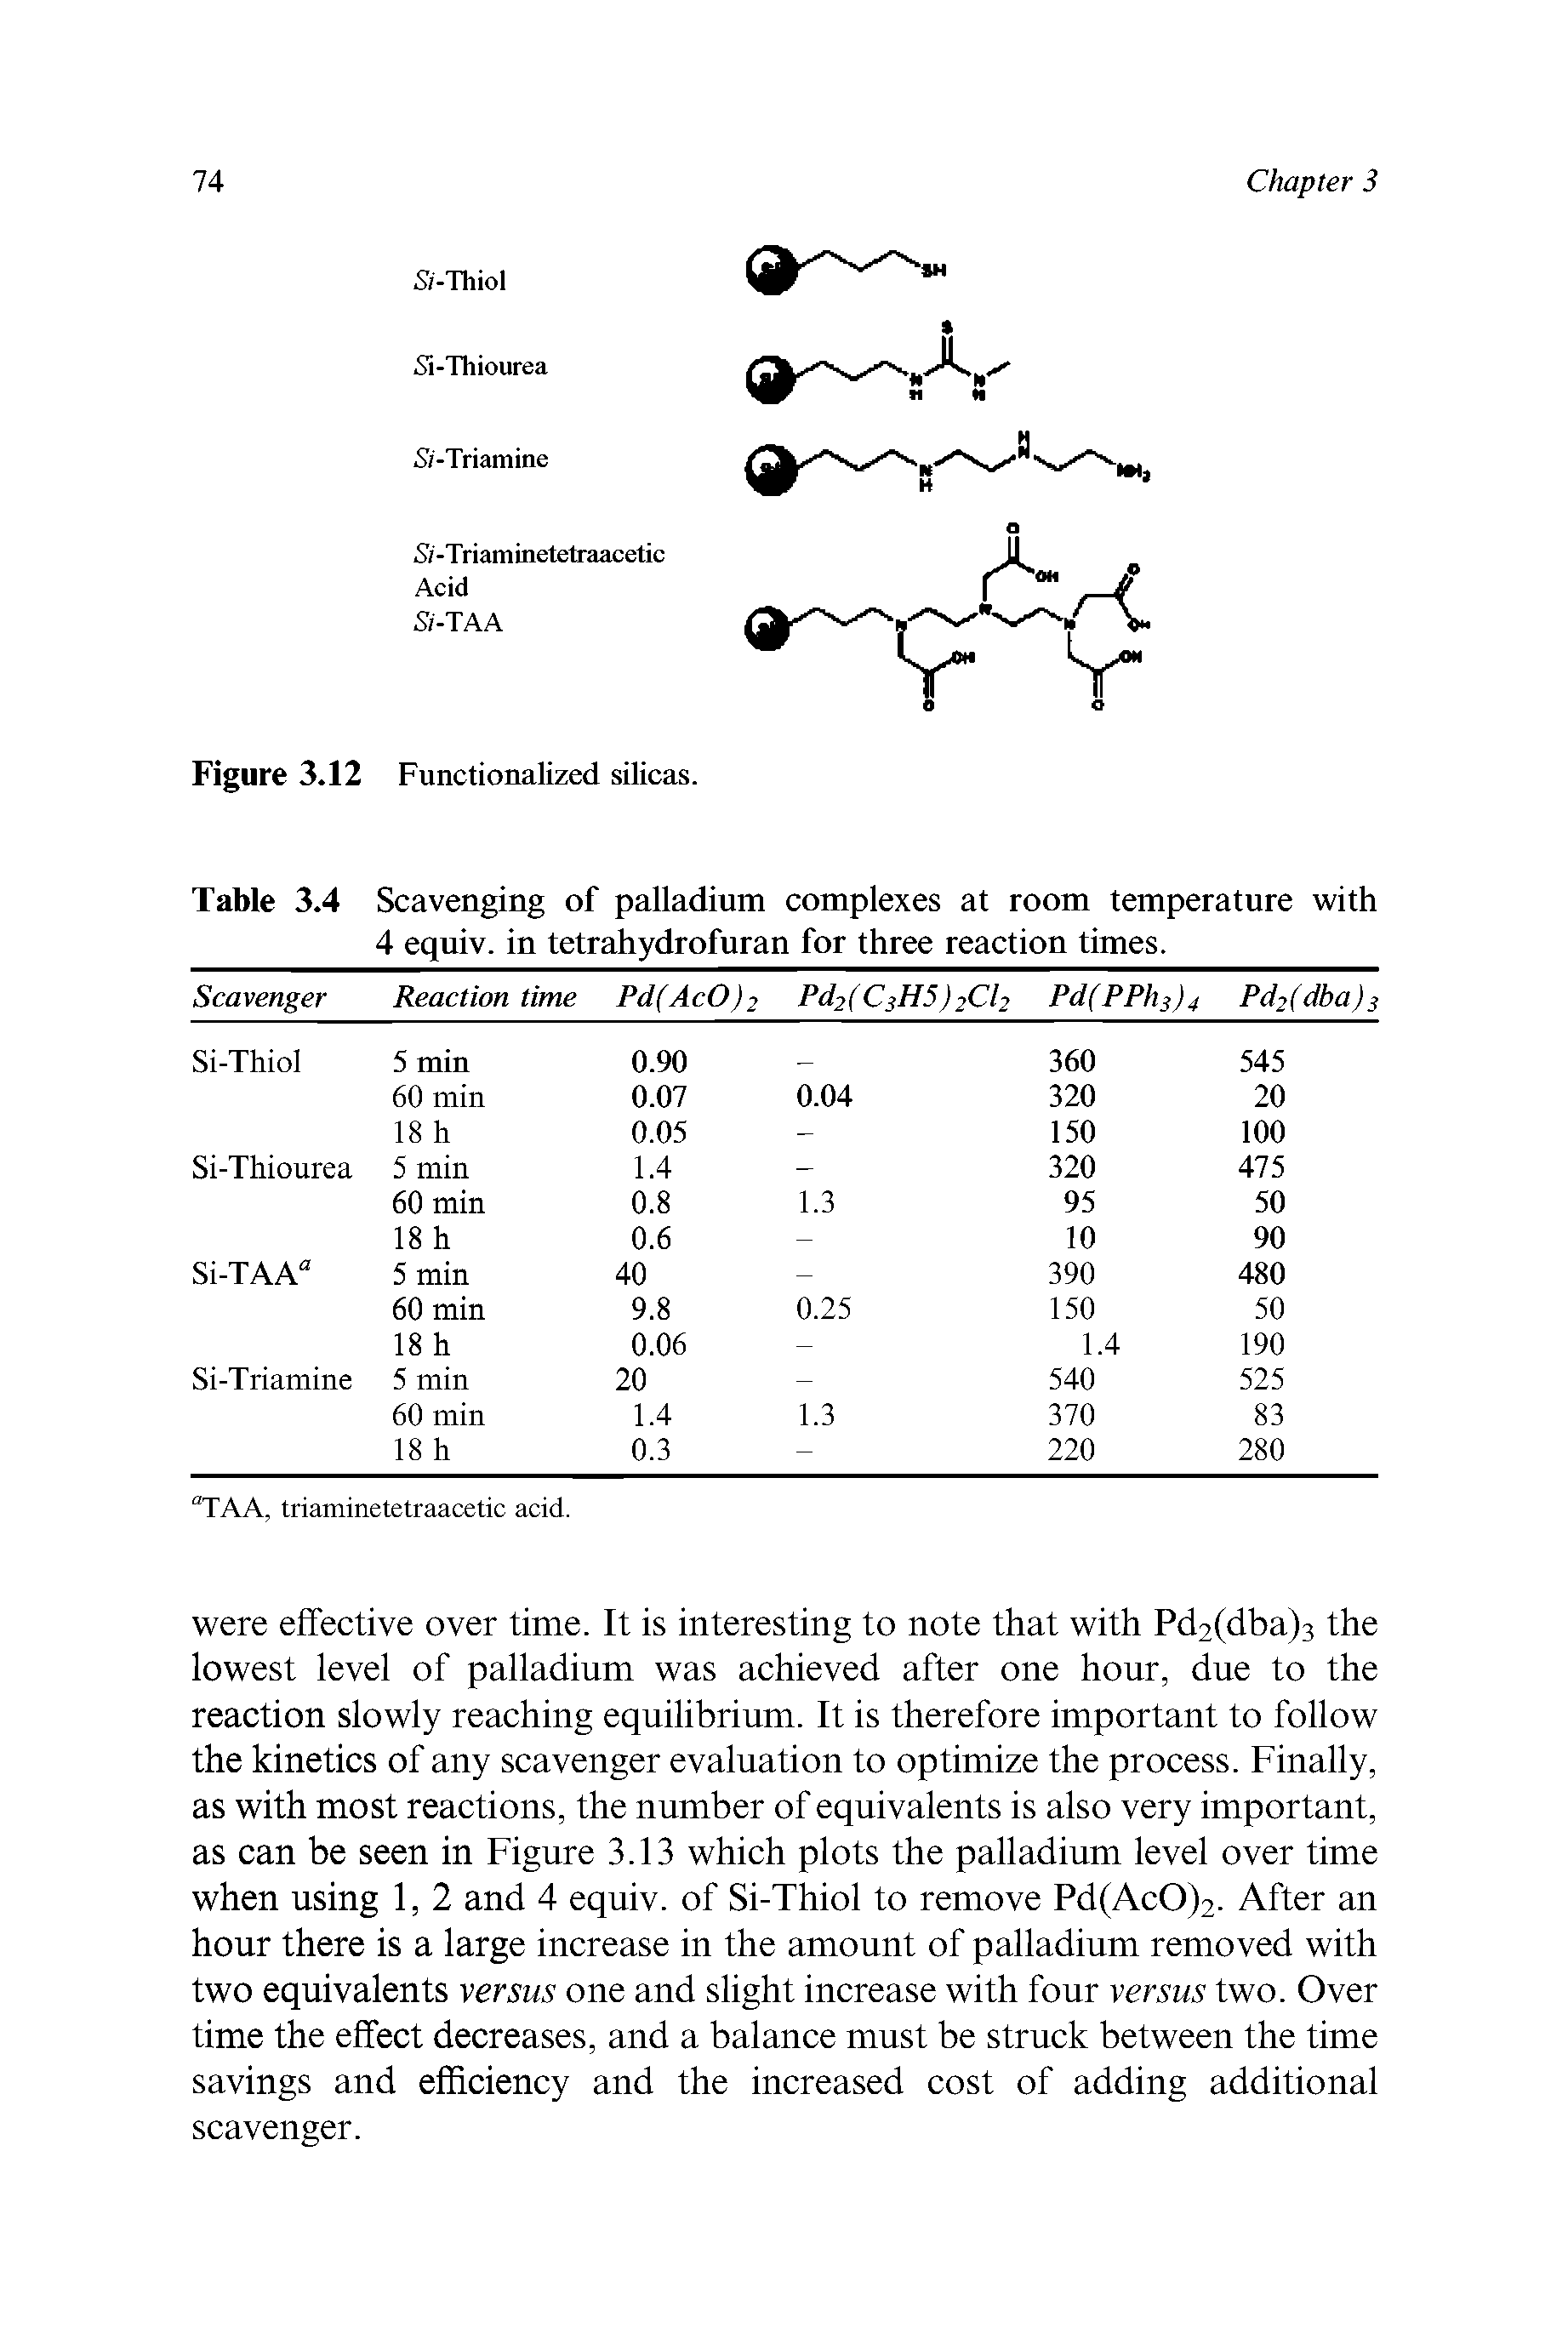 Table 3.4 Scavenging of palladium complexes at room temperature with 4 equiv. in tetrahydrofuran for three reaction times.